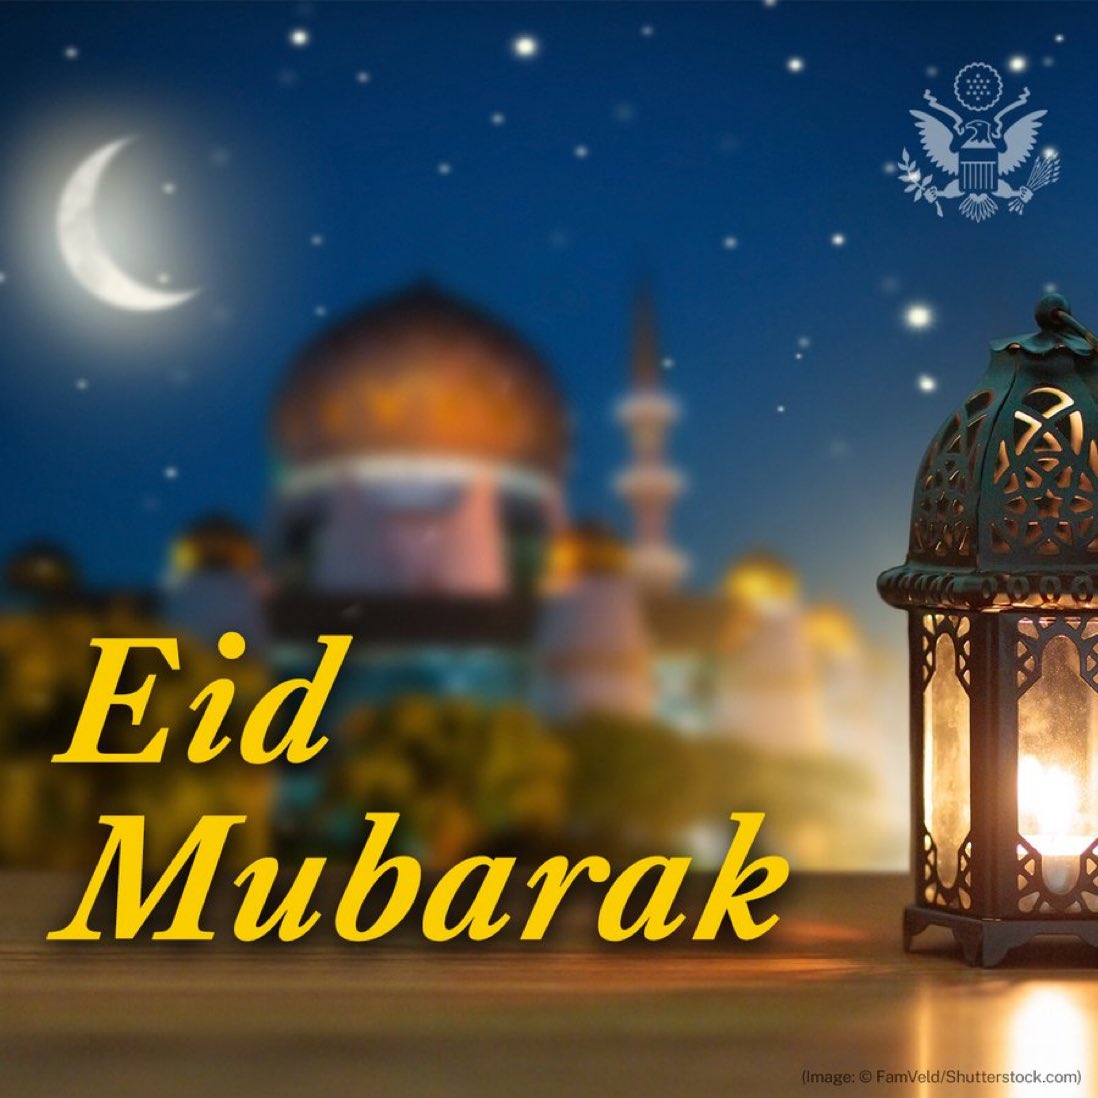 Wishing a happy Eid to all @MLCSU @MLCSUImprove colleagues, friends and others who are celebrating today #EidMubarak